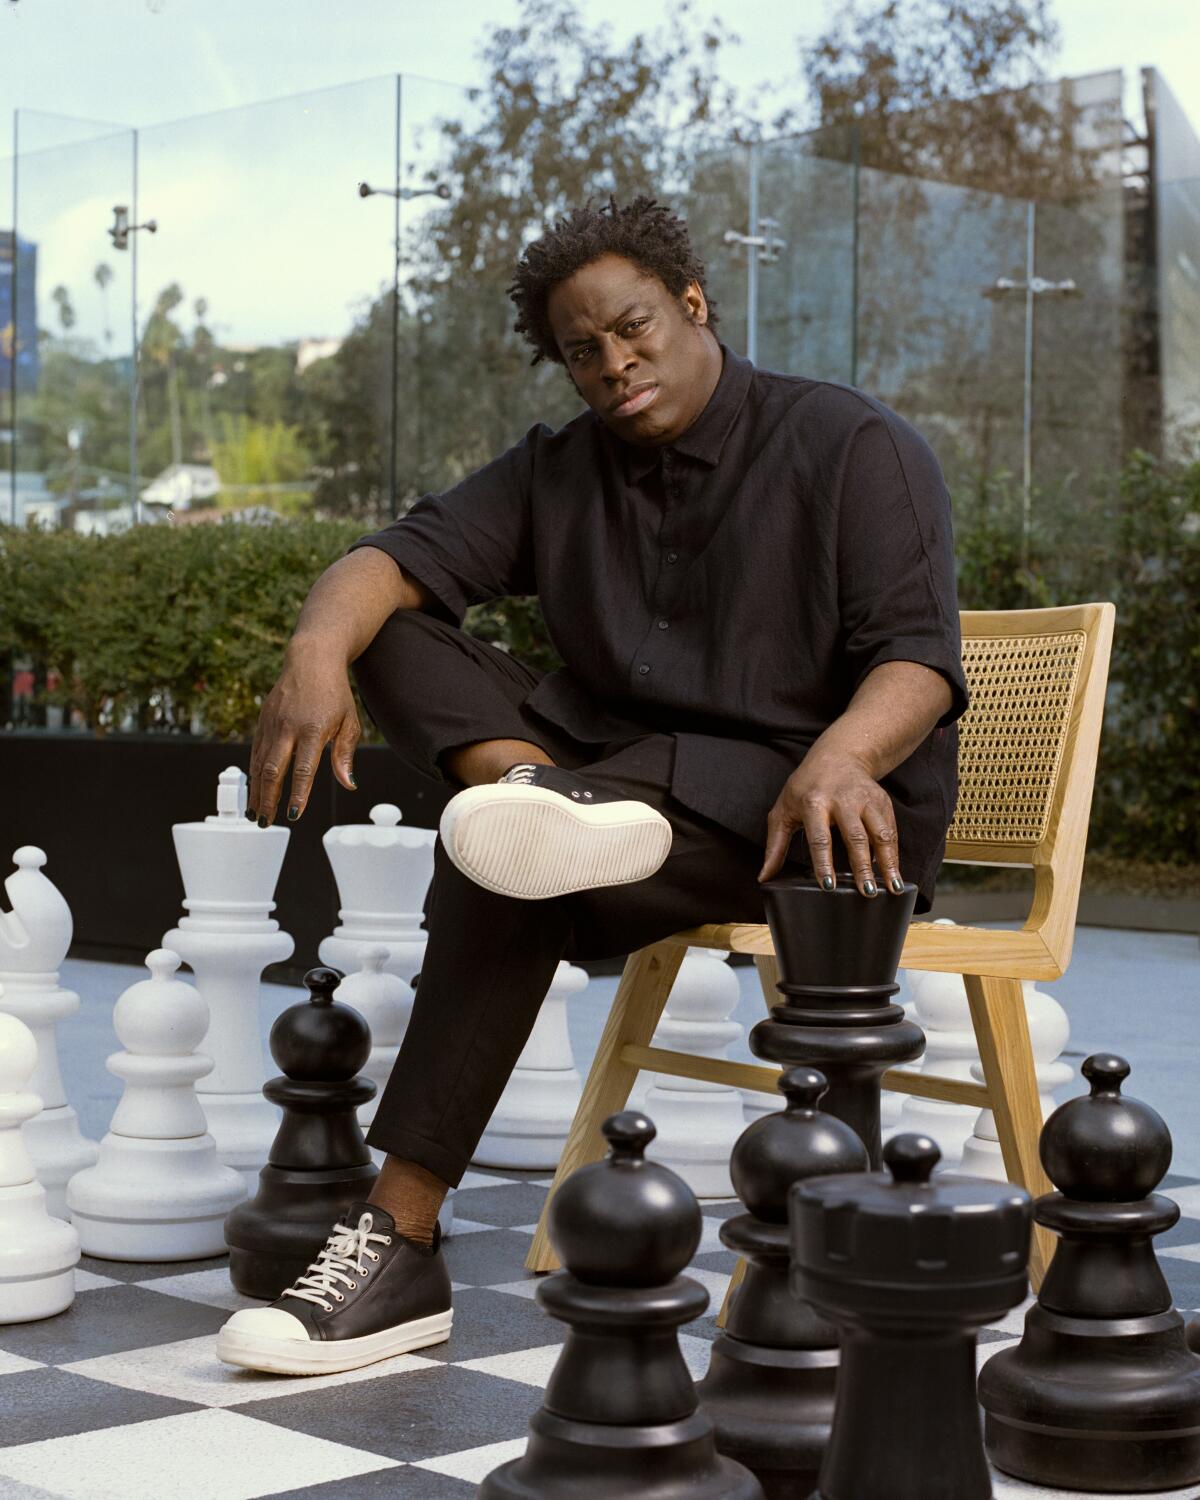 A man sits within a large patio chess set.